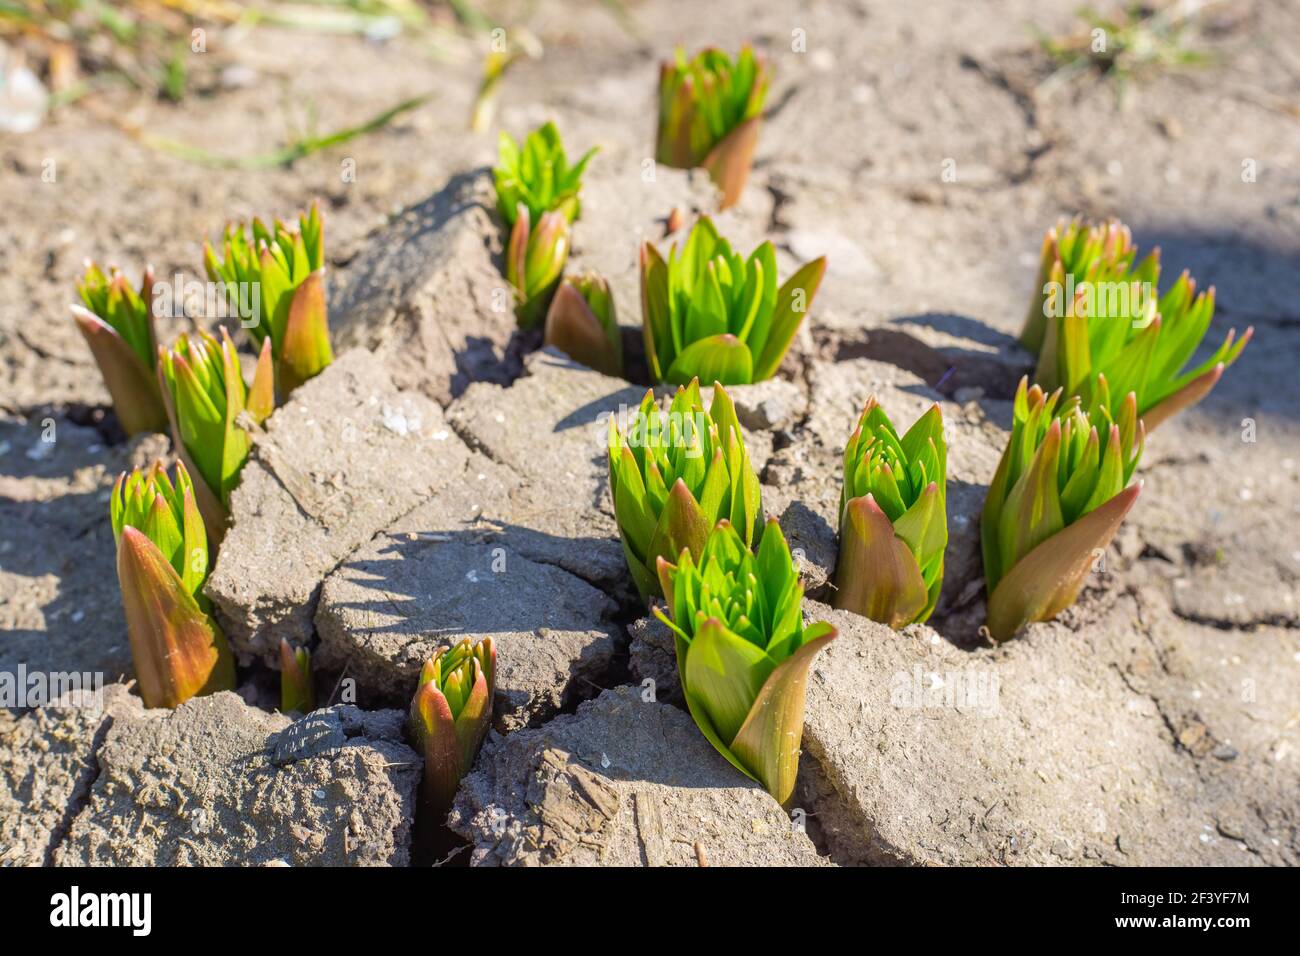 Sprouts of young lily bulbs sprouting from the cracked ground in spring. The awakening of nature. Stock Photo